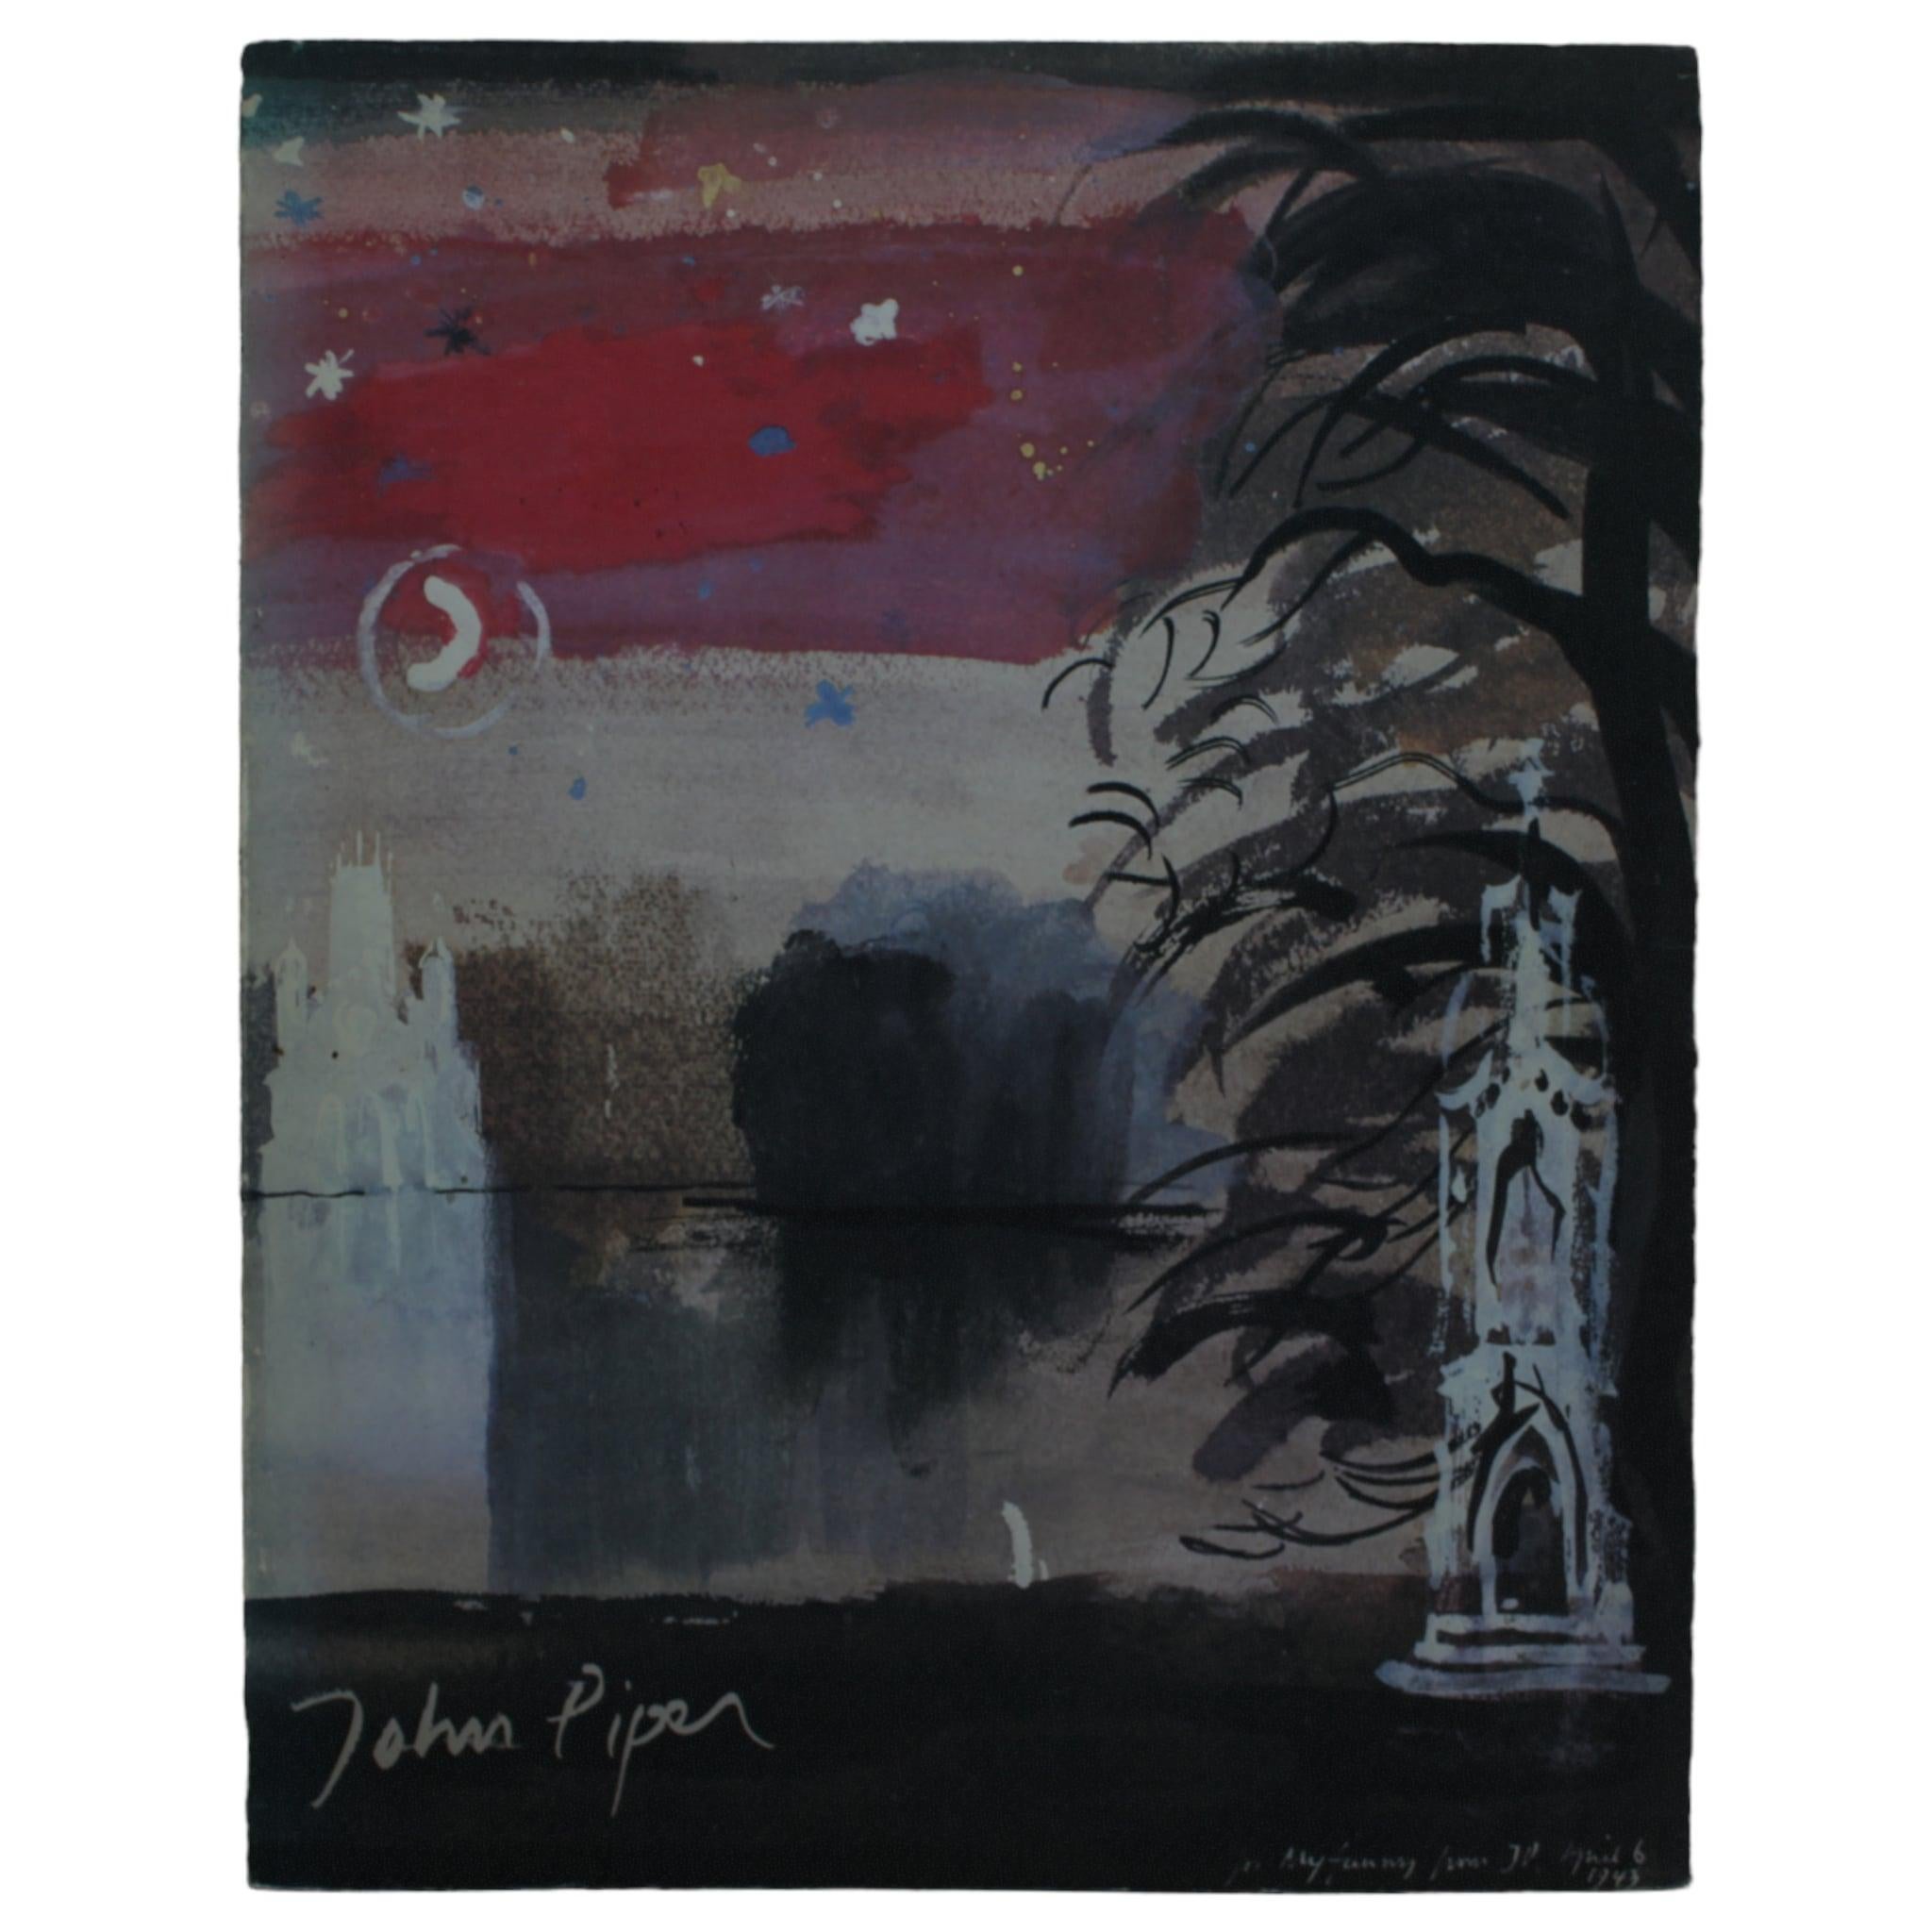 John Piper
Published by The Tate Gallery in 1983

This John Piper Art Book offers a glimpse into his creative brilliance and ever-evolving artistic expression. From vibrant landscapes to mesmerizing abstracts, each artwork is a symphony of colour,